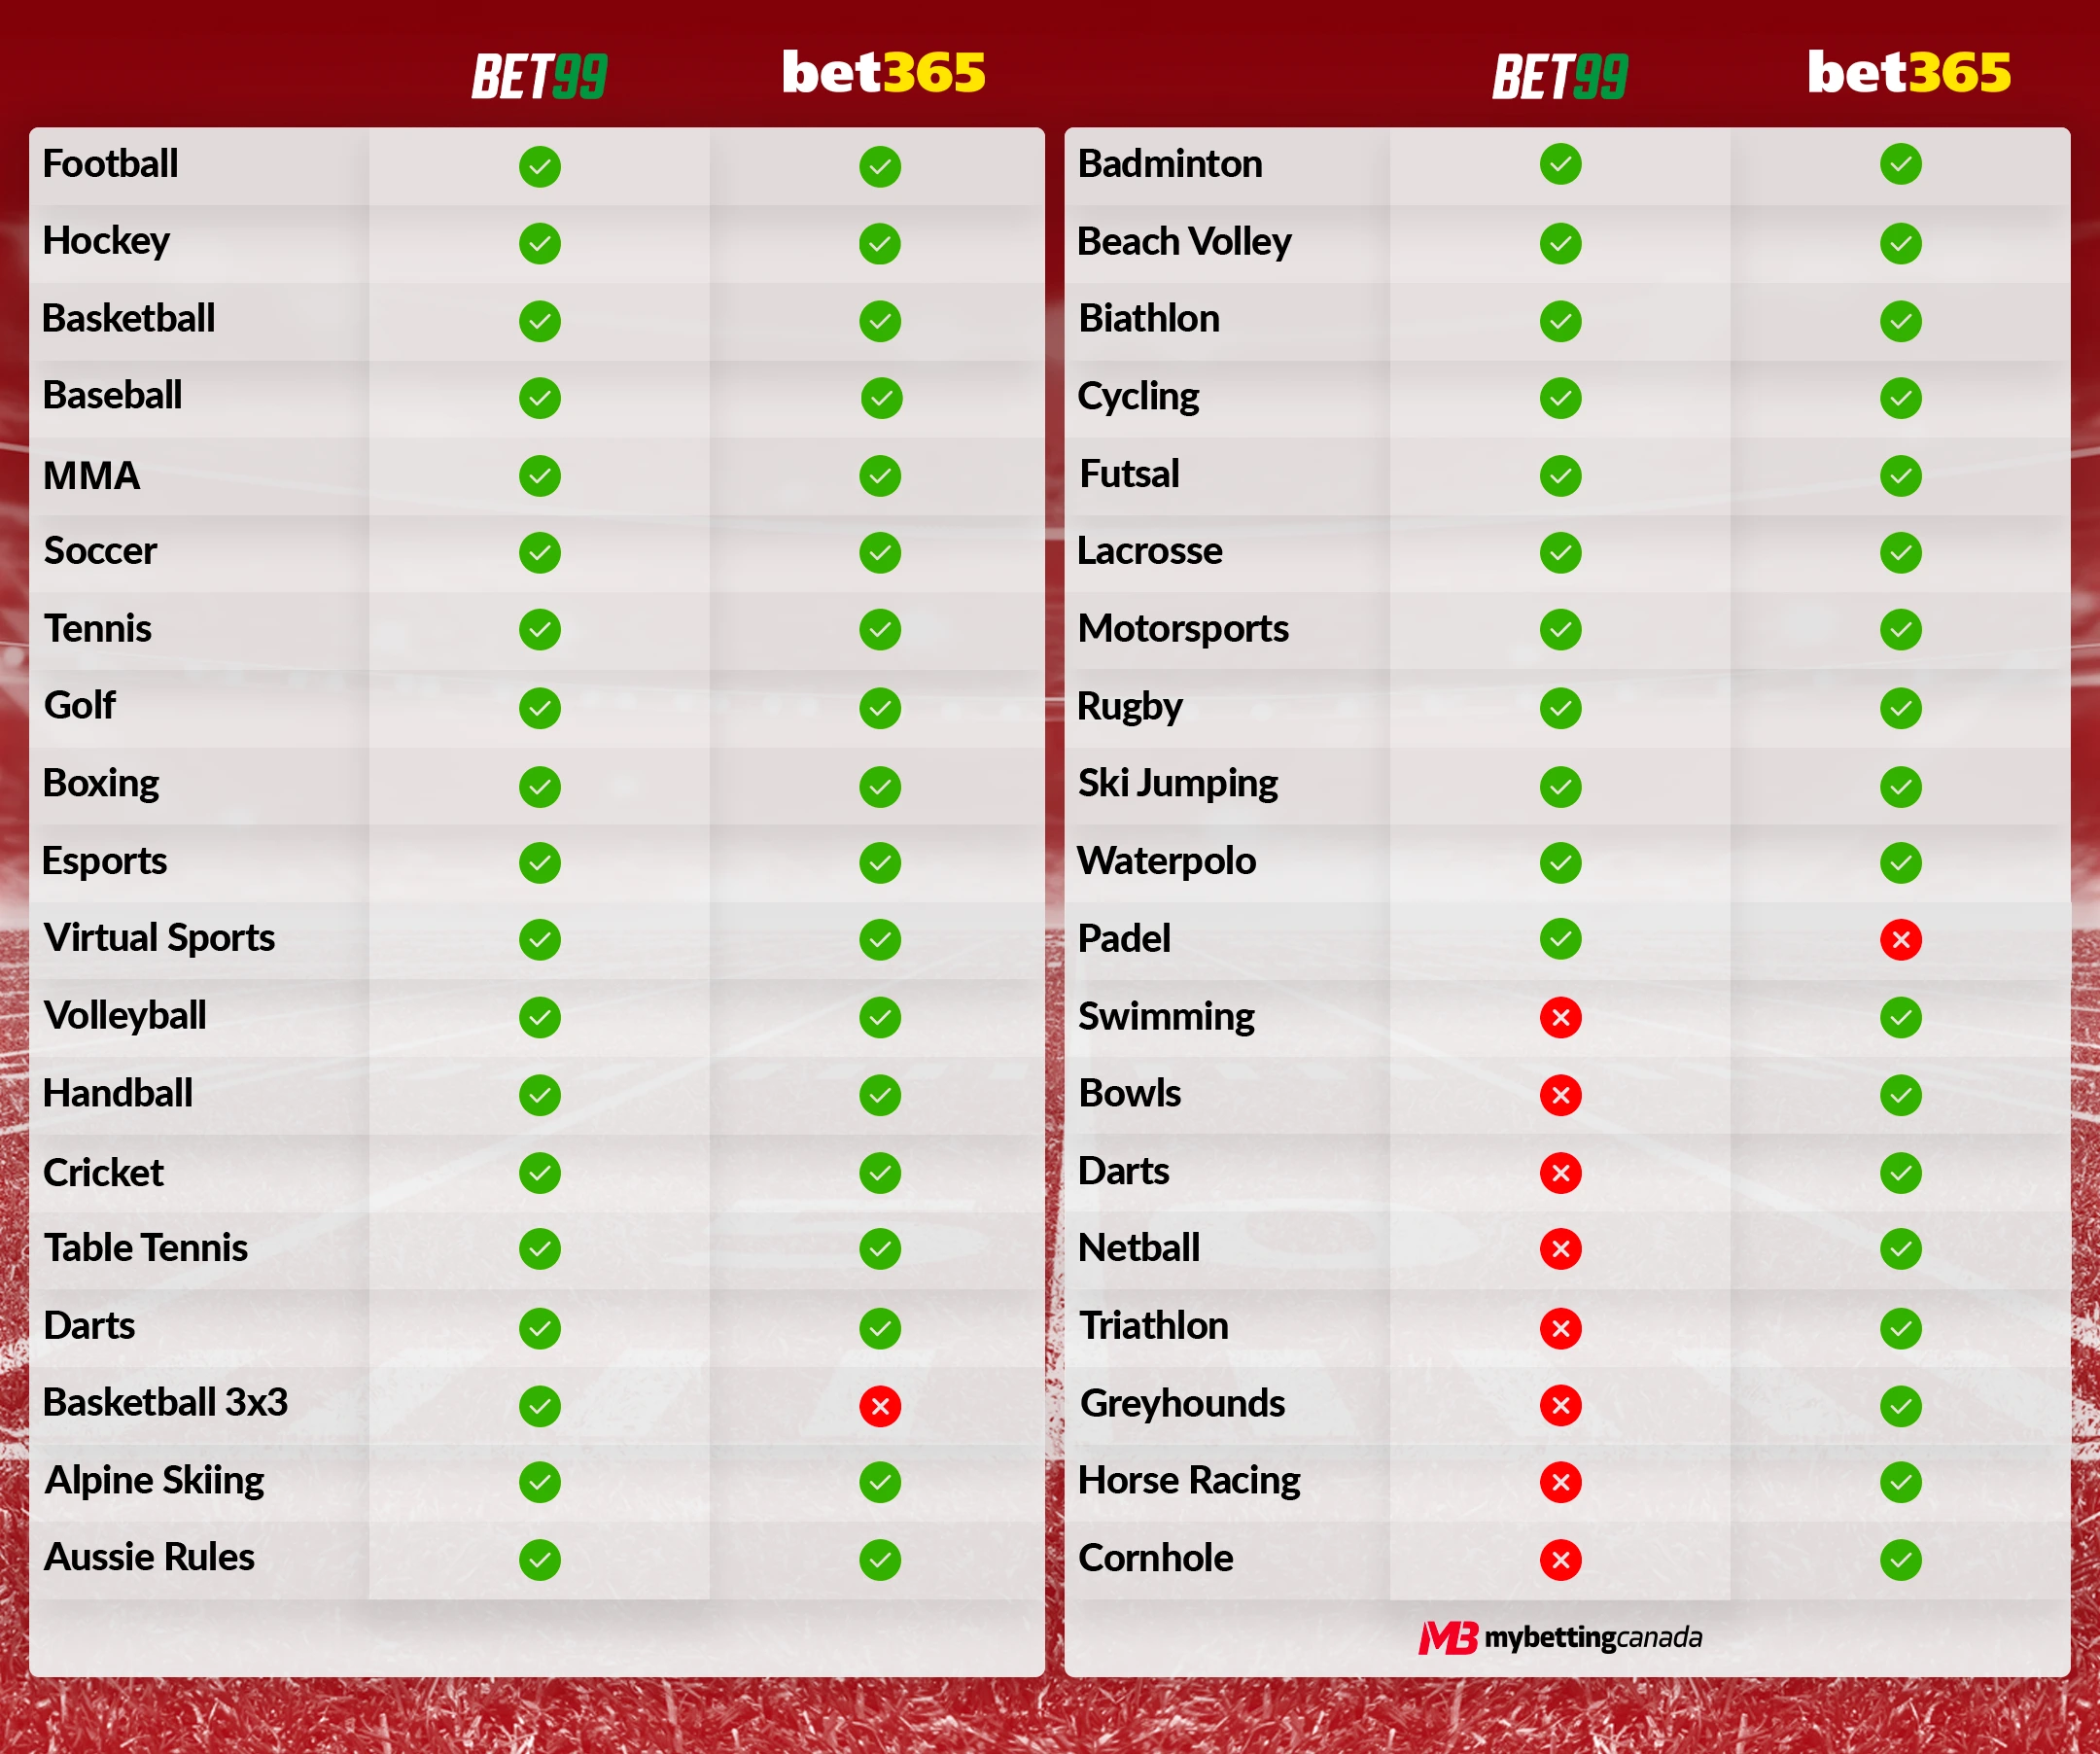 Bet99 vs Bet365 sports coverage